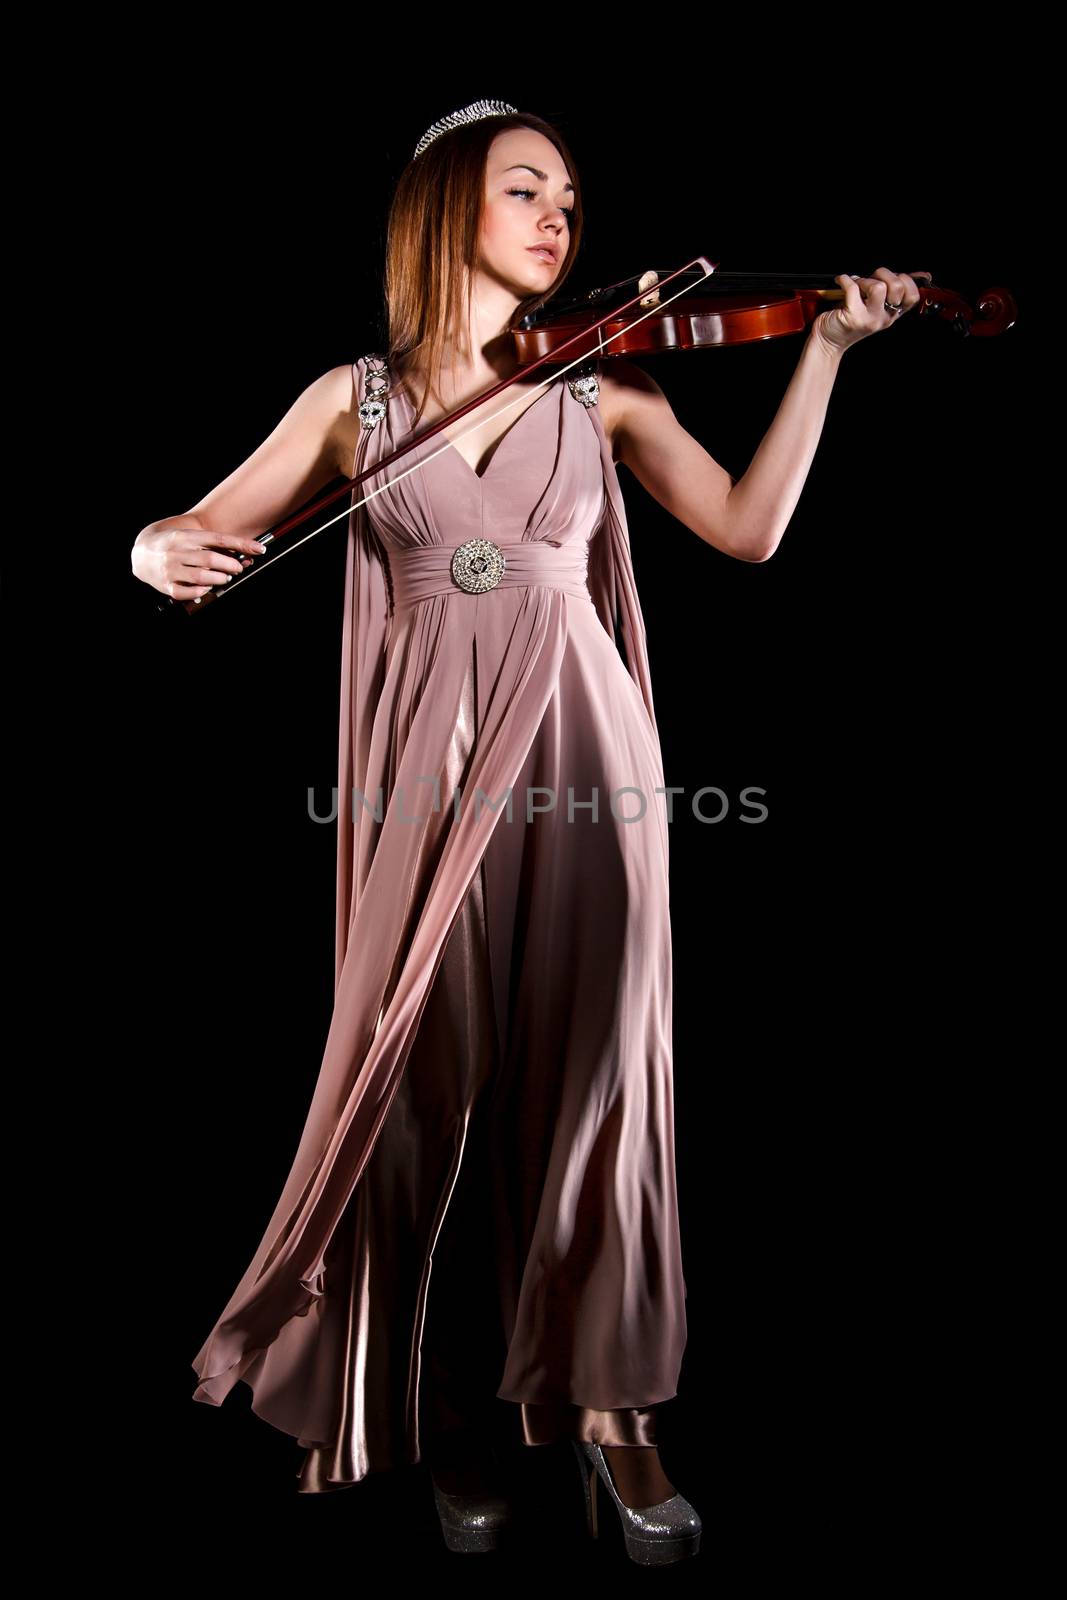 Pretty young woman playing a violin by Artzzz